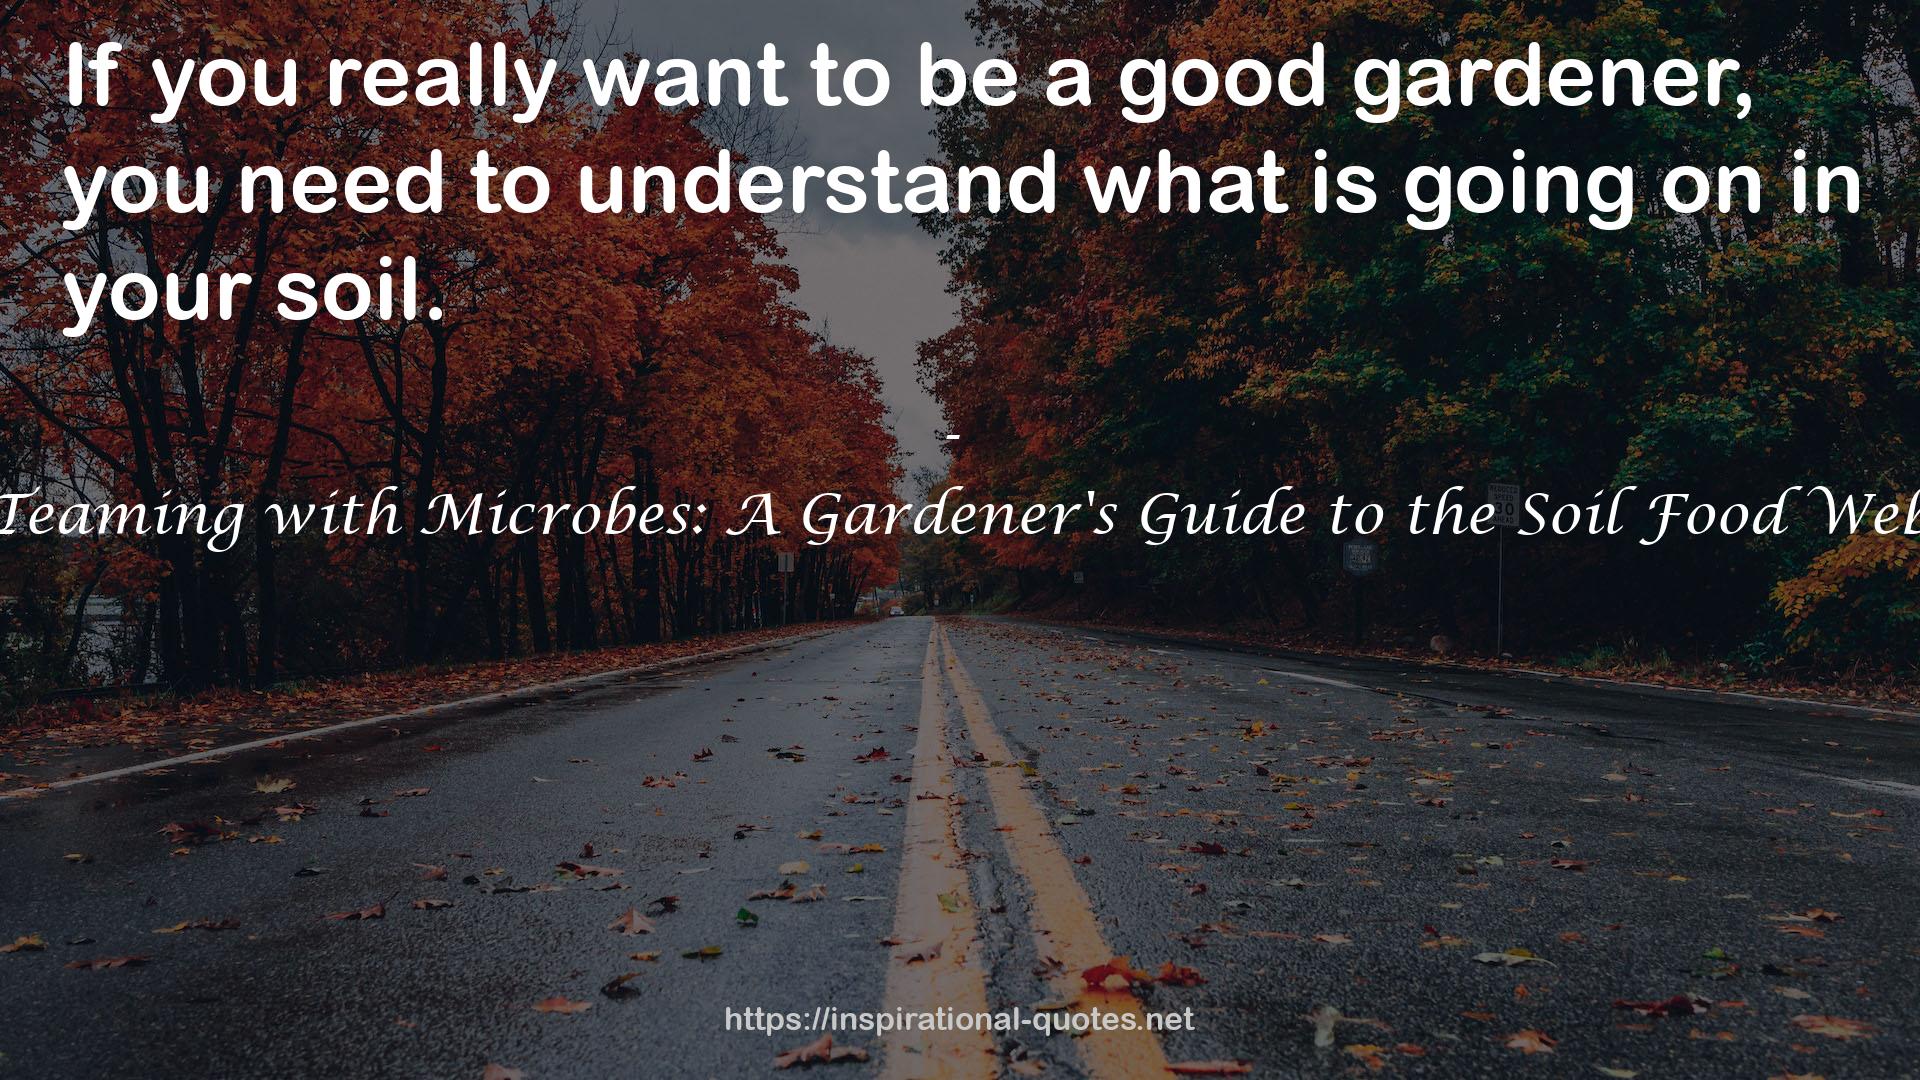 Teaming with Microbes: A Gardener's Guide to the Soil Food Web QUOTES